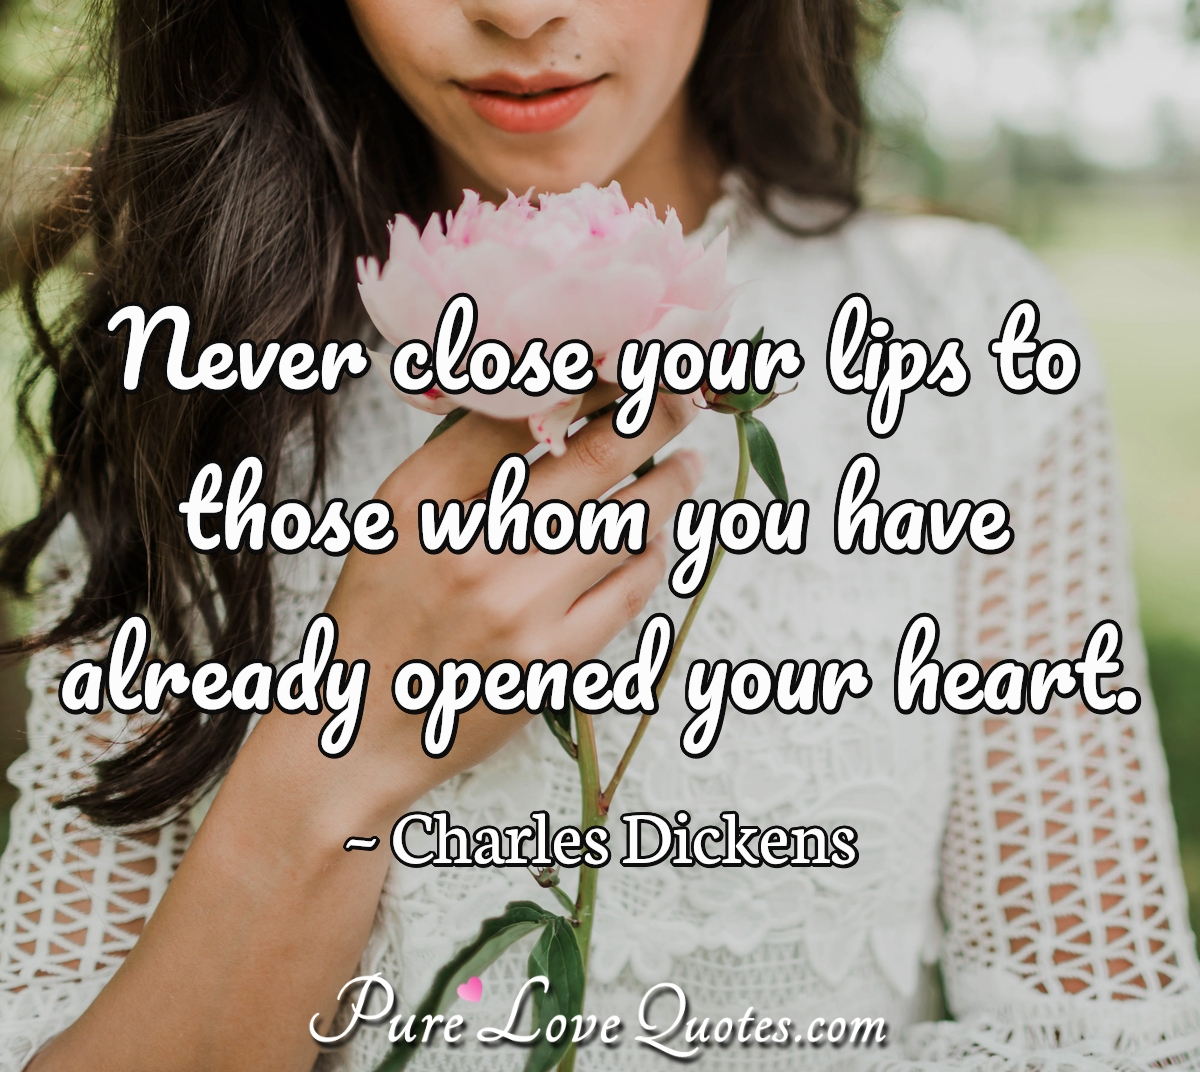 Never close your lips to those whom you have already opened your heart. - Charles Dickens